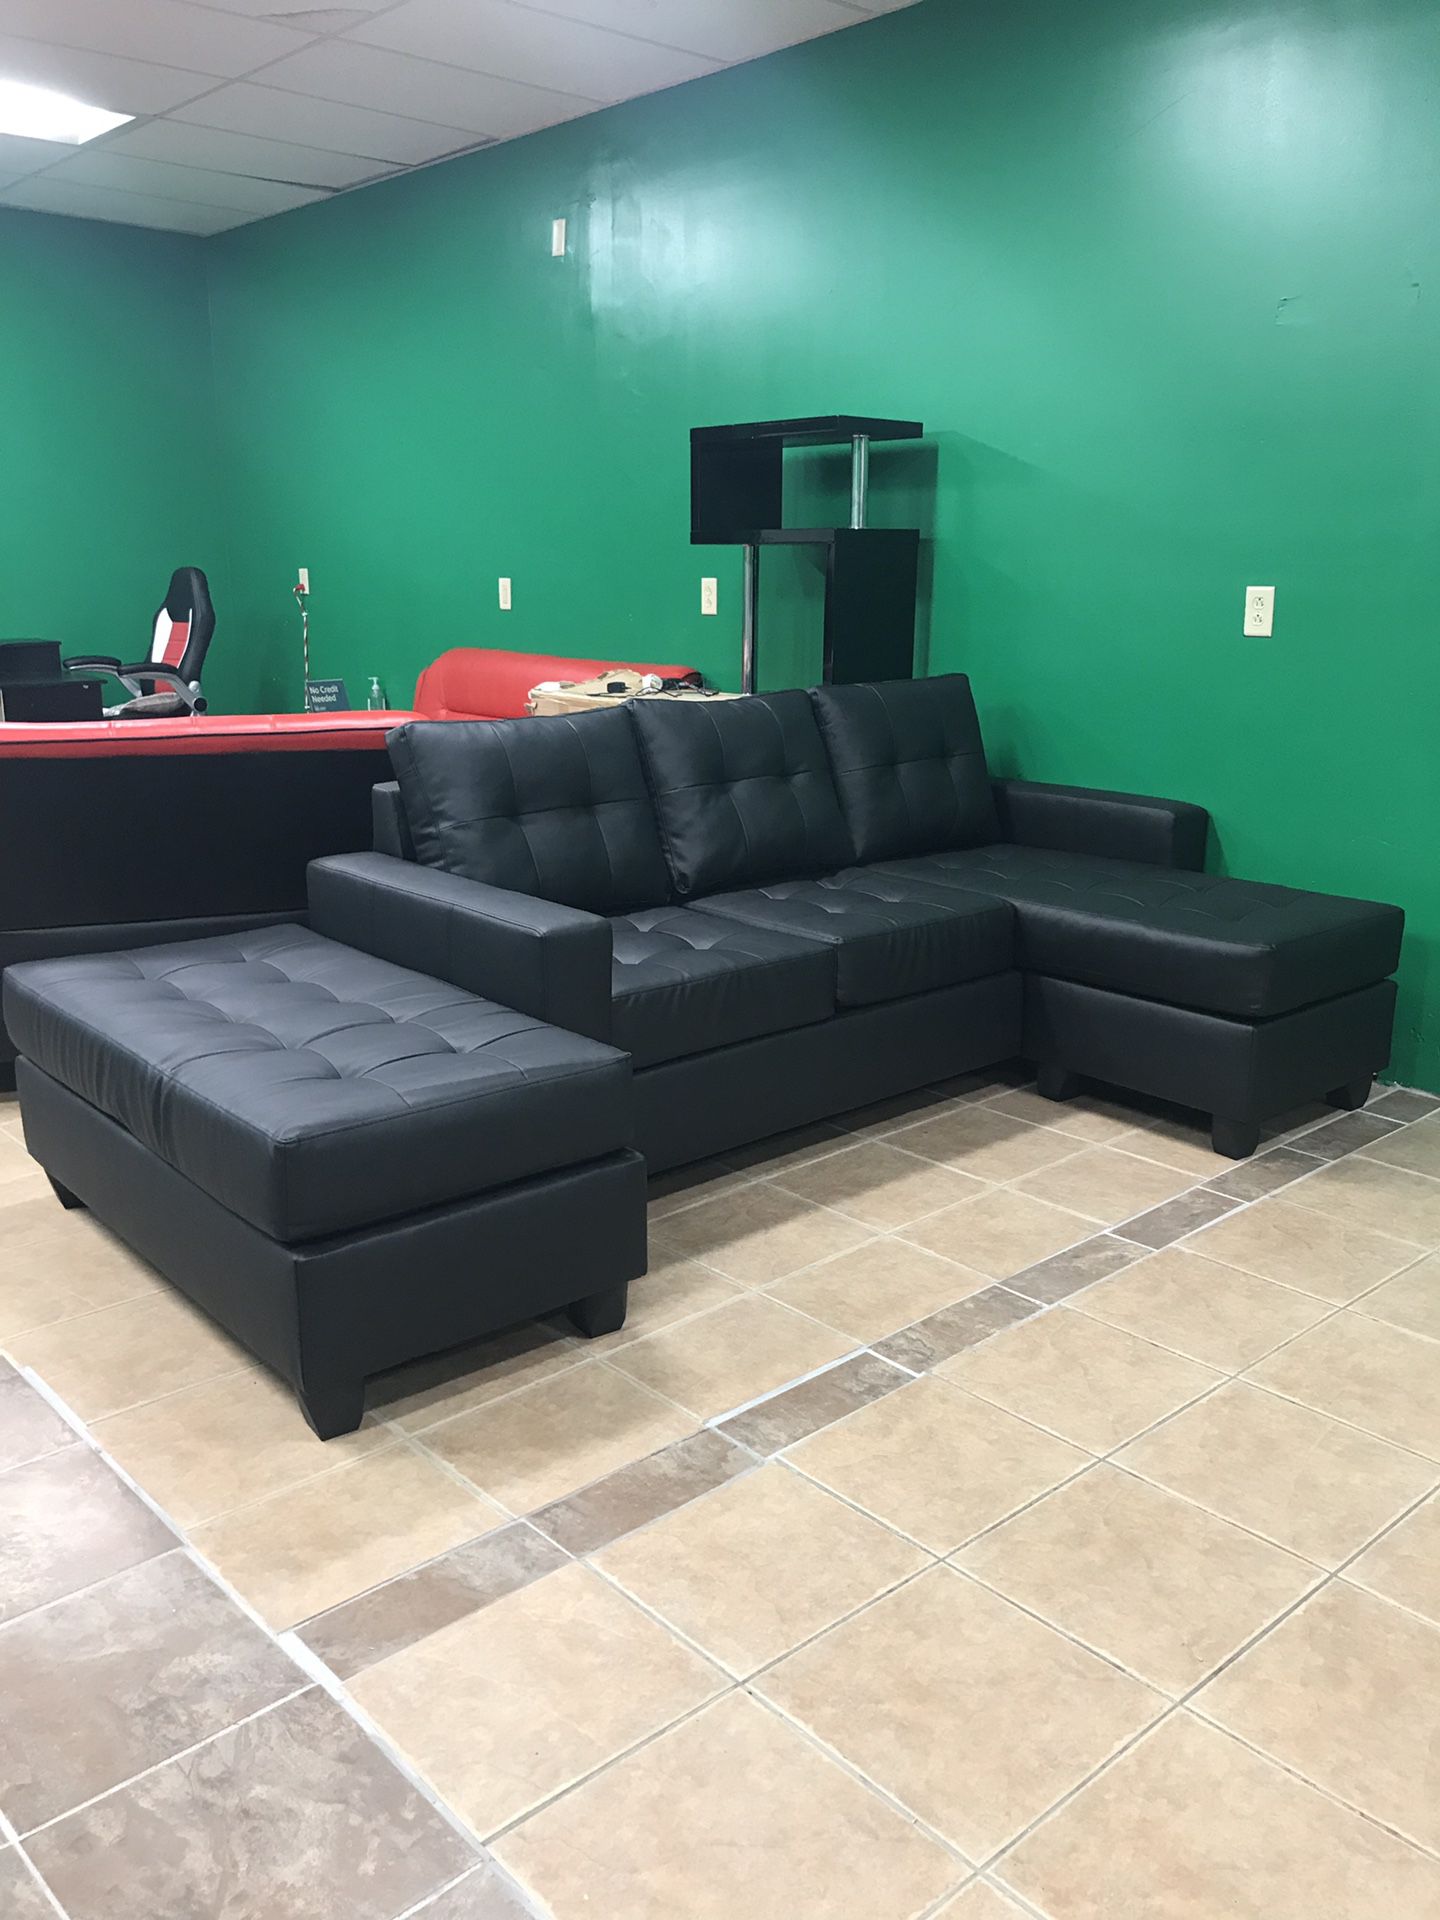 Brand new sectional sofa chaise with ottoman included > delivery or pick up 🚚